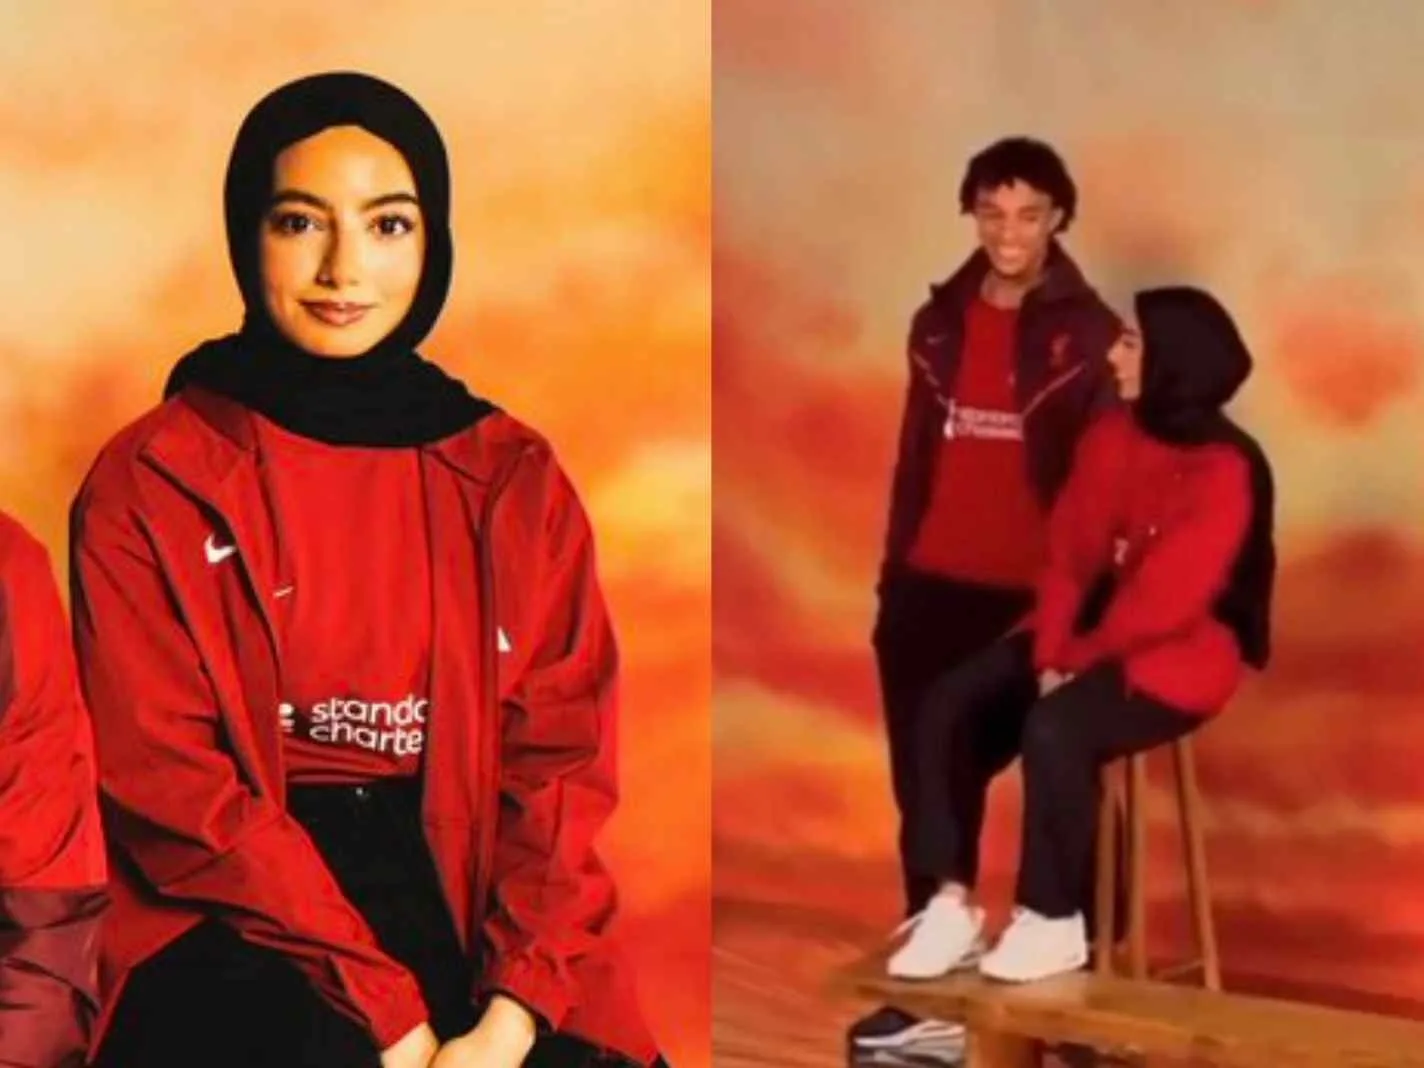 The photo shows Selma Bazara with Trent Alexander-Arnold during Liverpool home kit photoshoot.